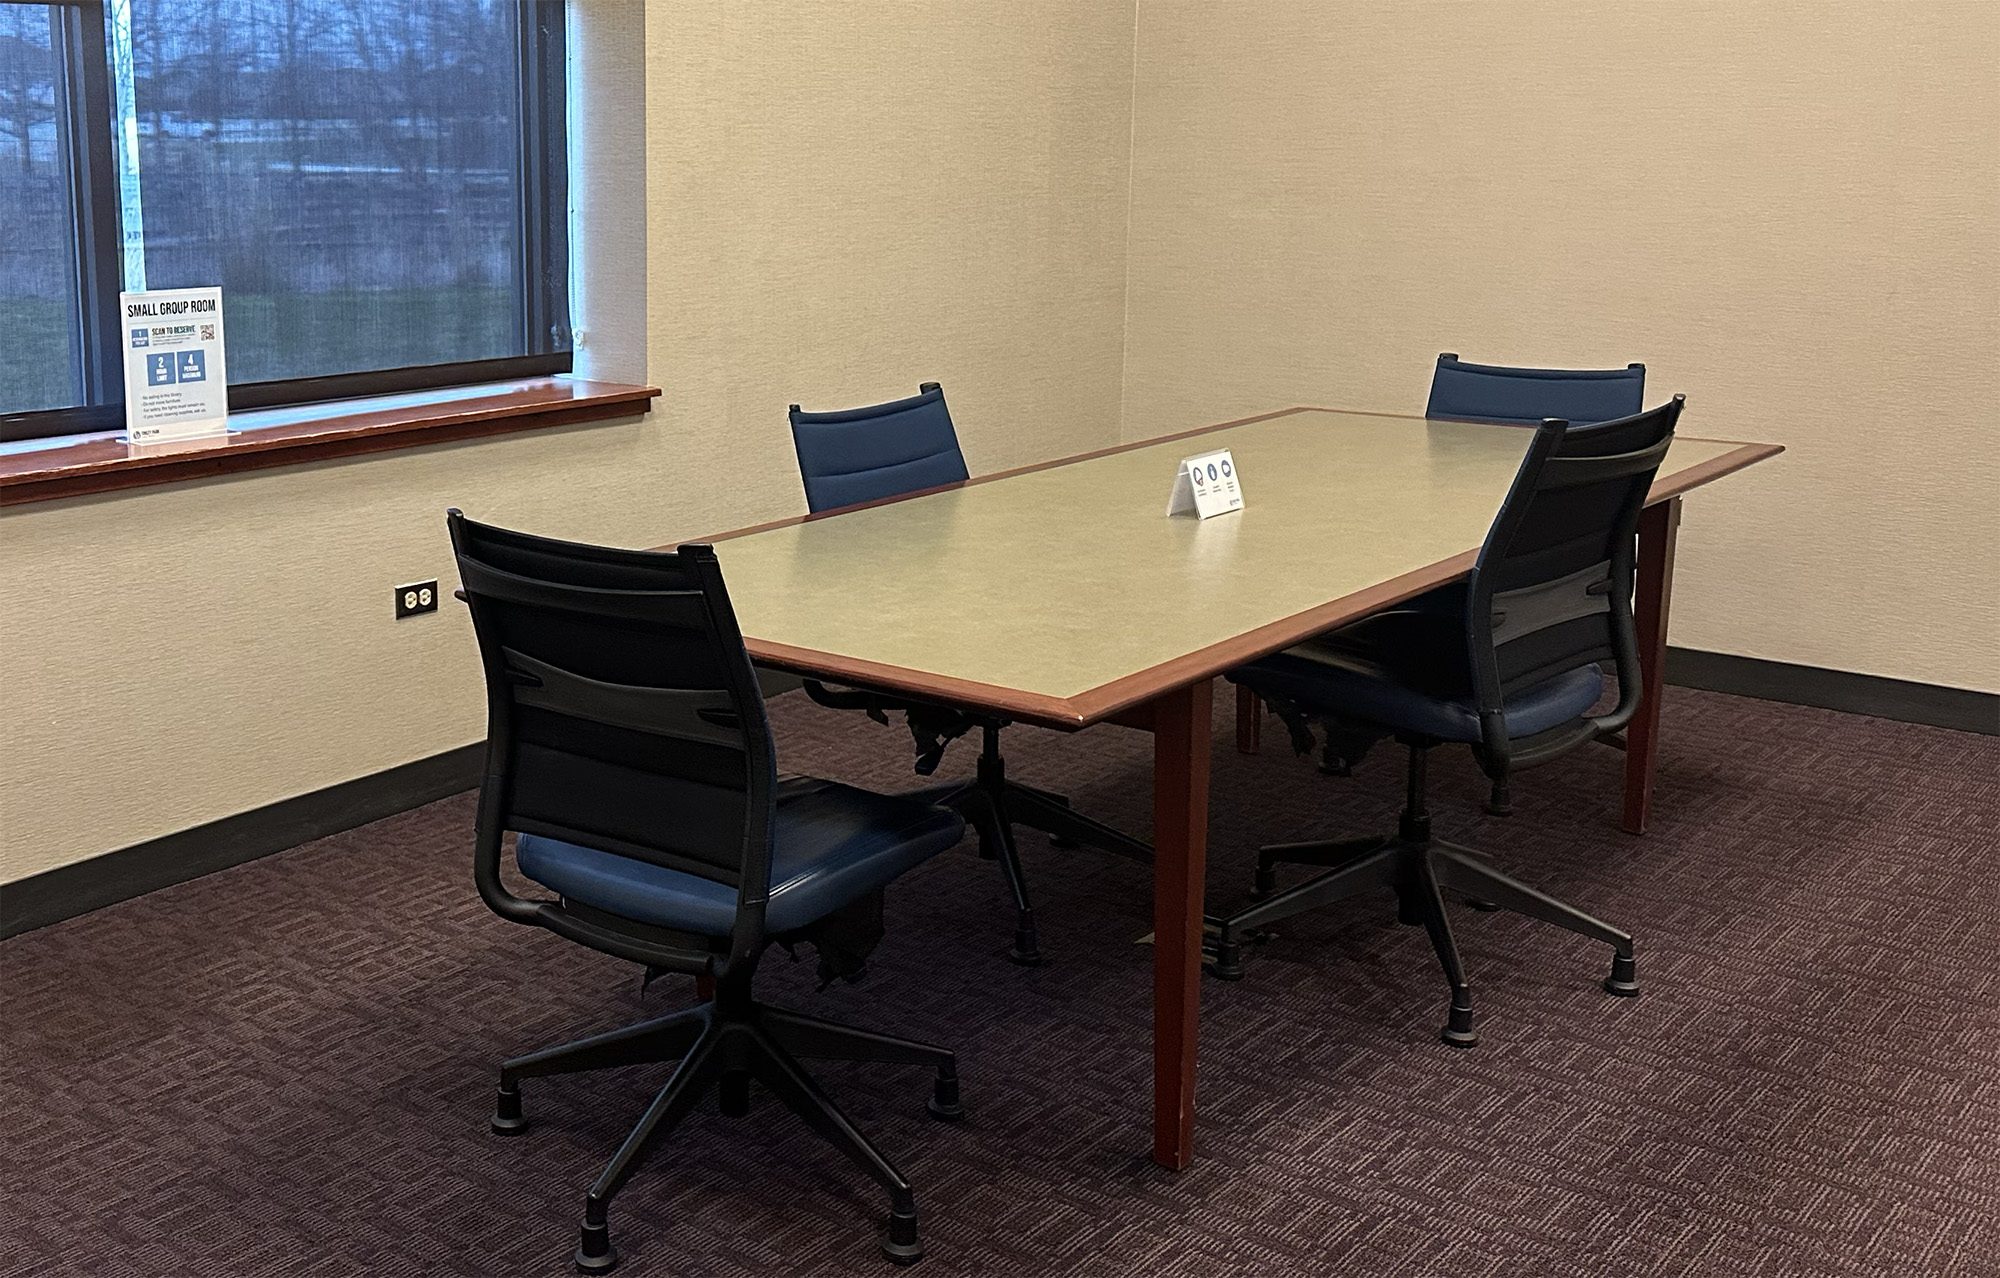 Small group room with table and four chairs